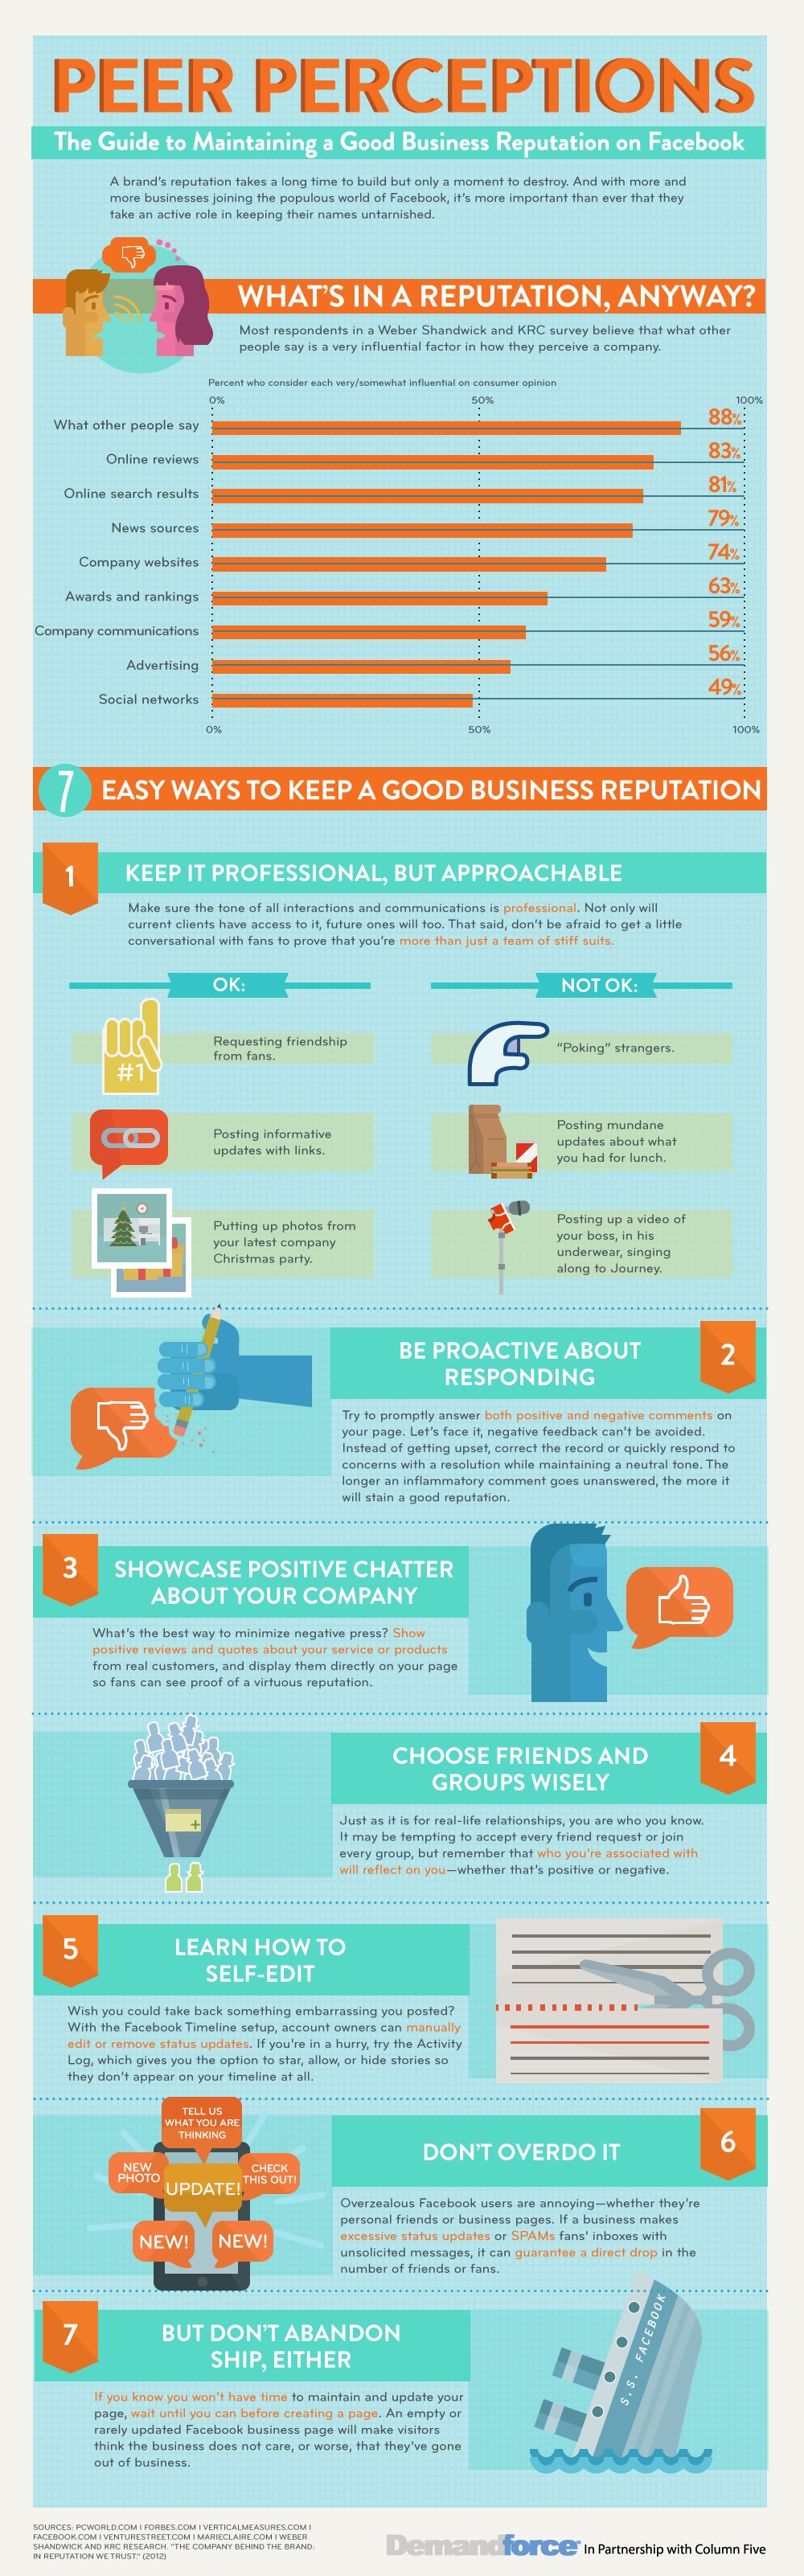 Business-Reputation-On-Facebook-Infographic